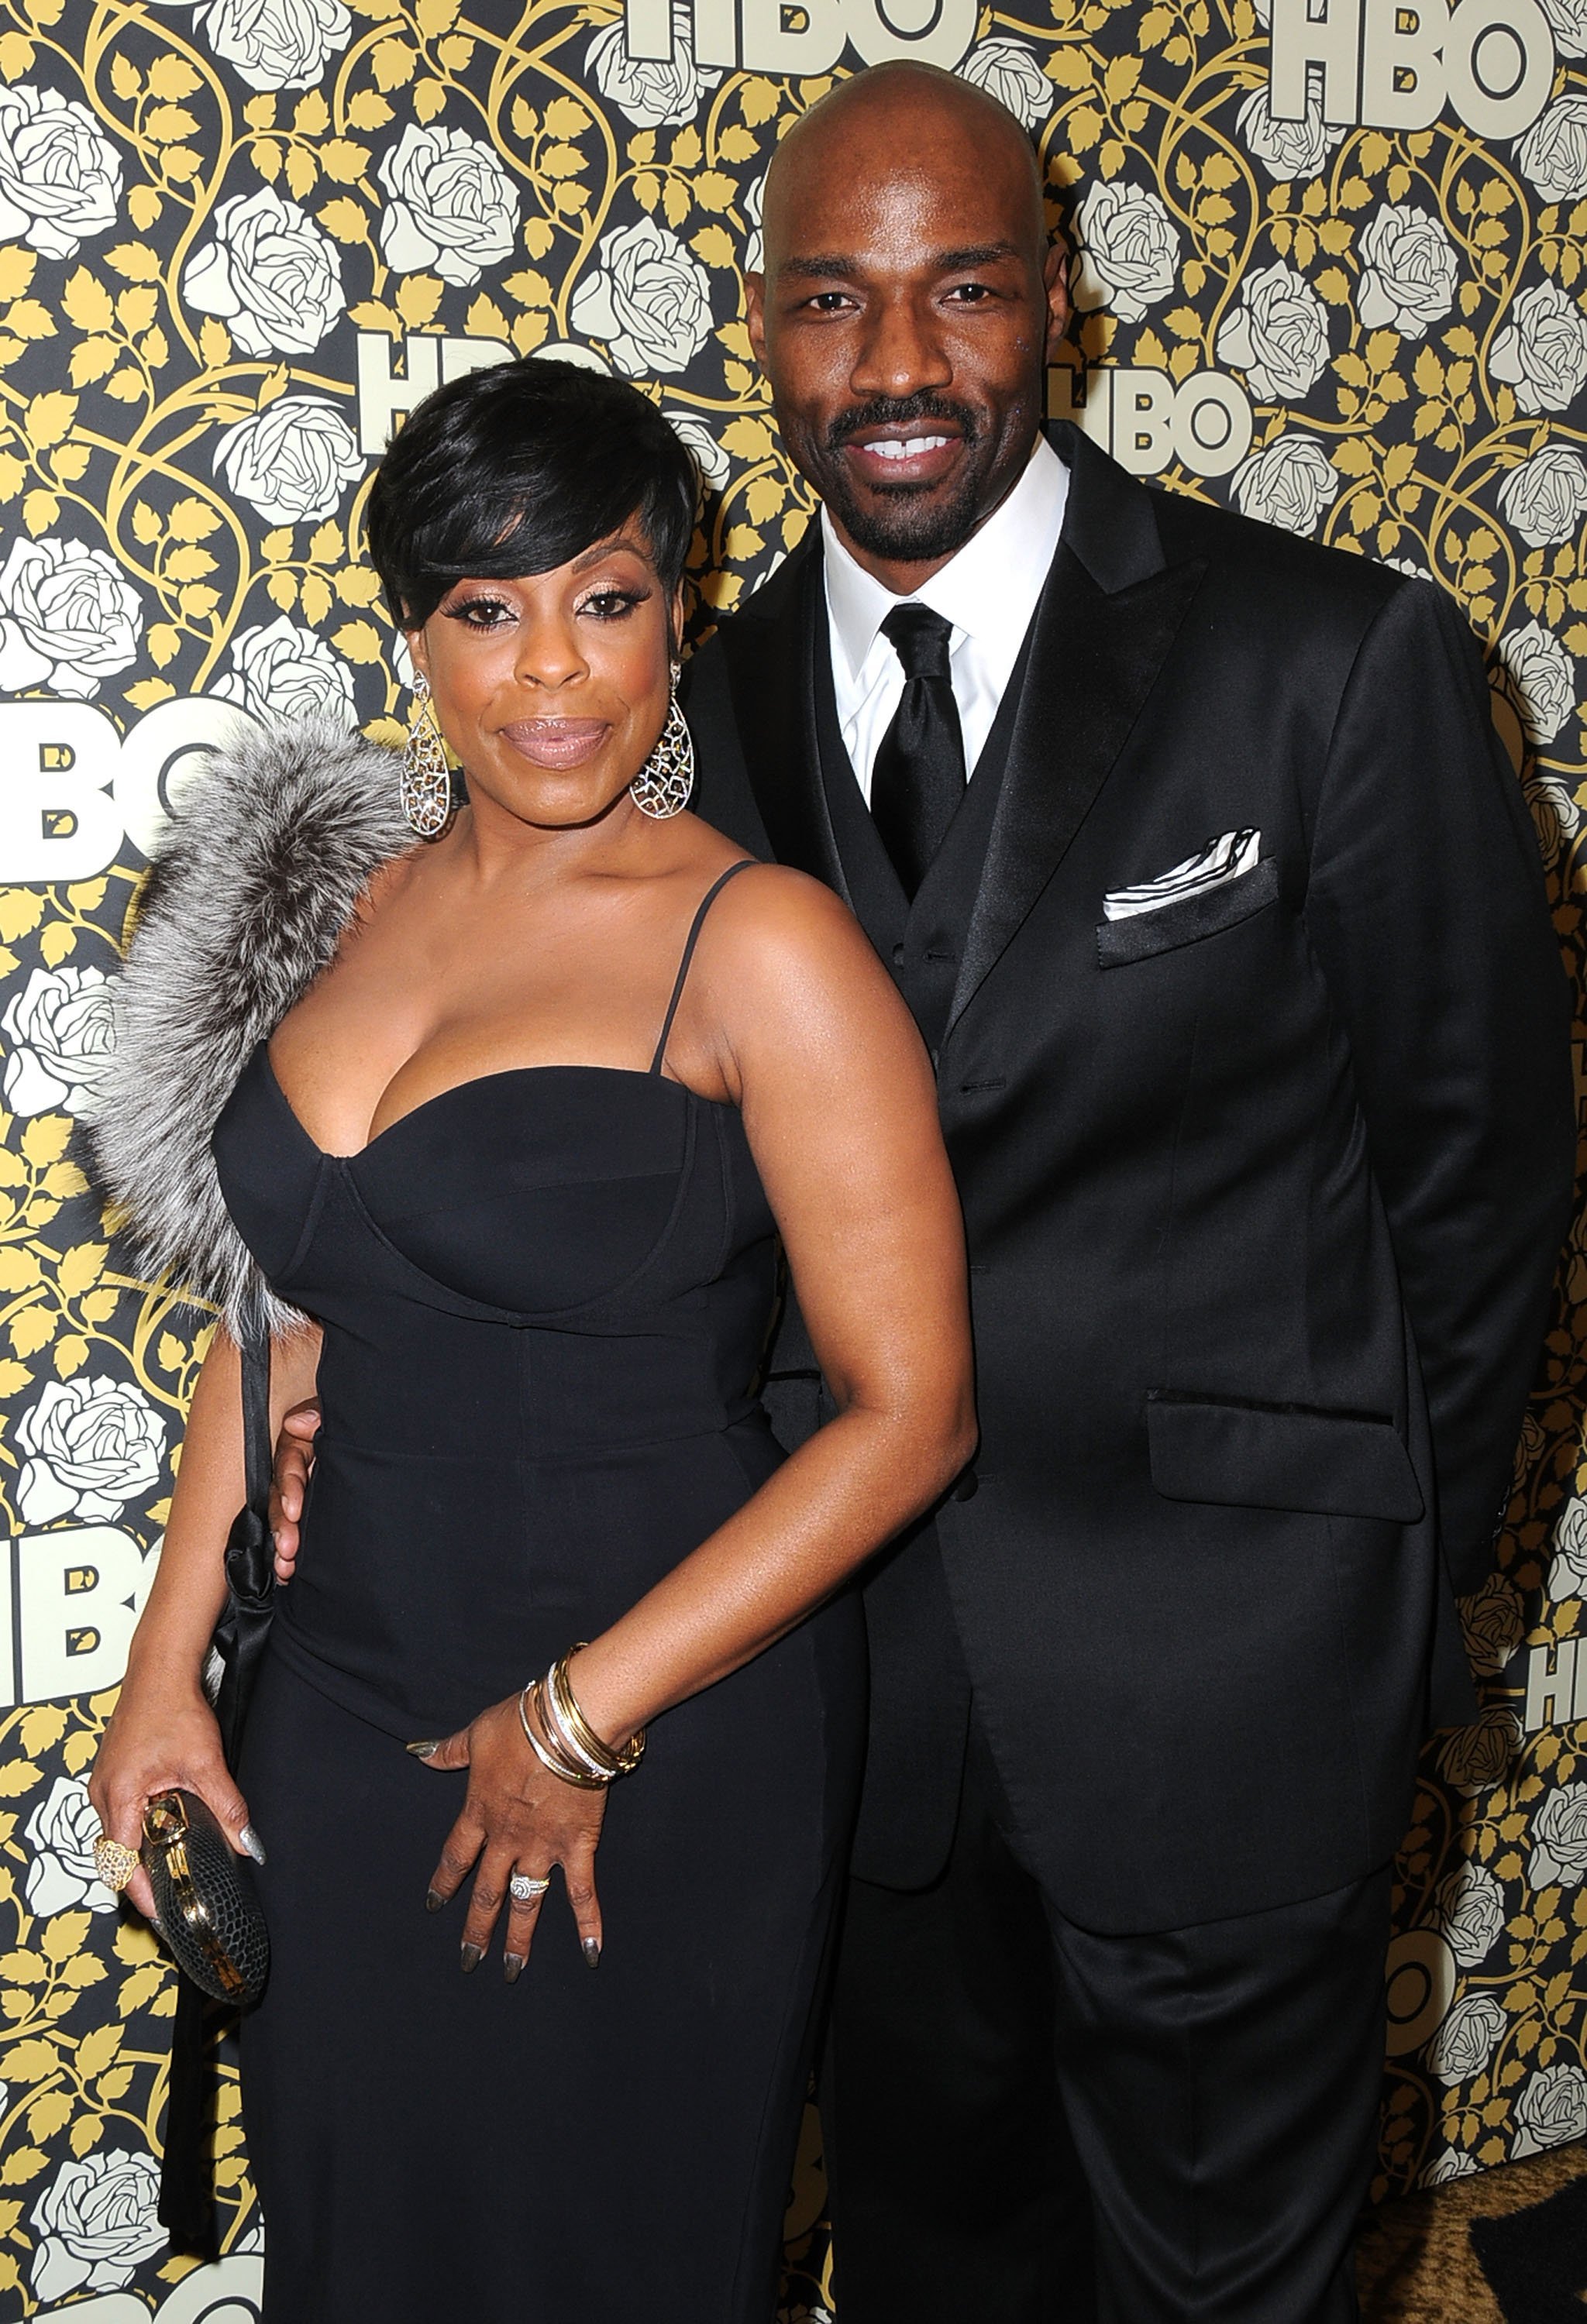 Niecy Nash and Jay Tucker at HBO's Post Golden Globes Awards Party in 2015. | Photo: Getty Images